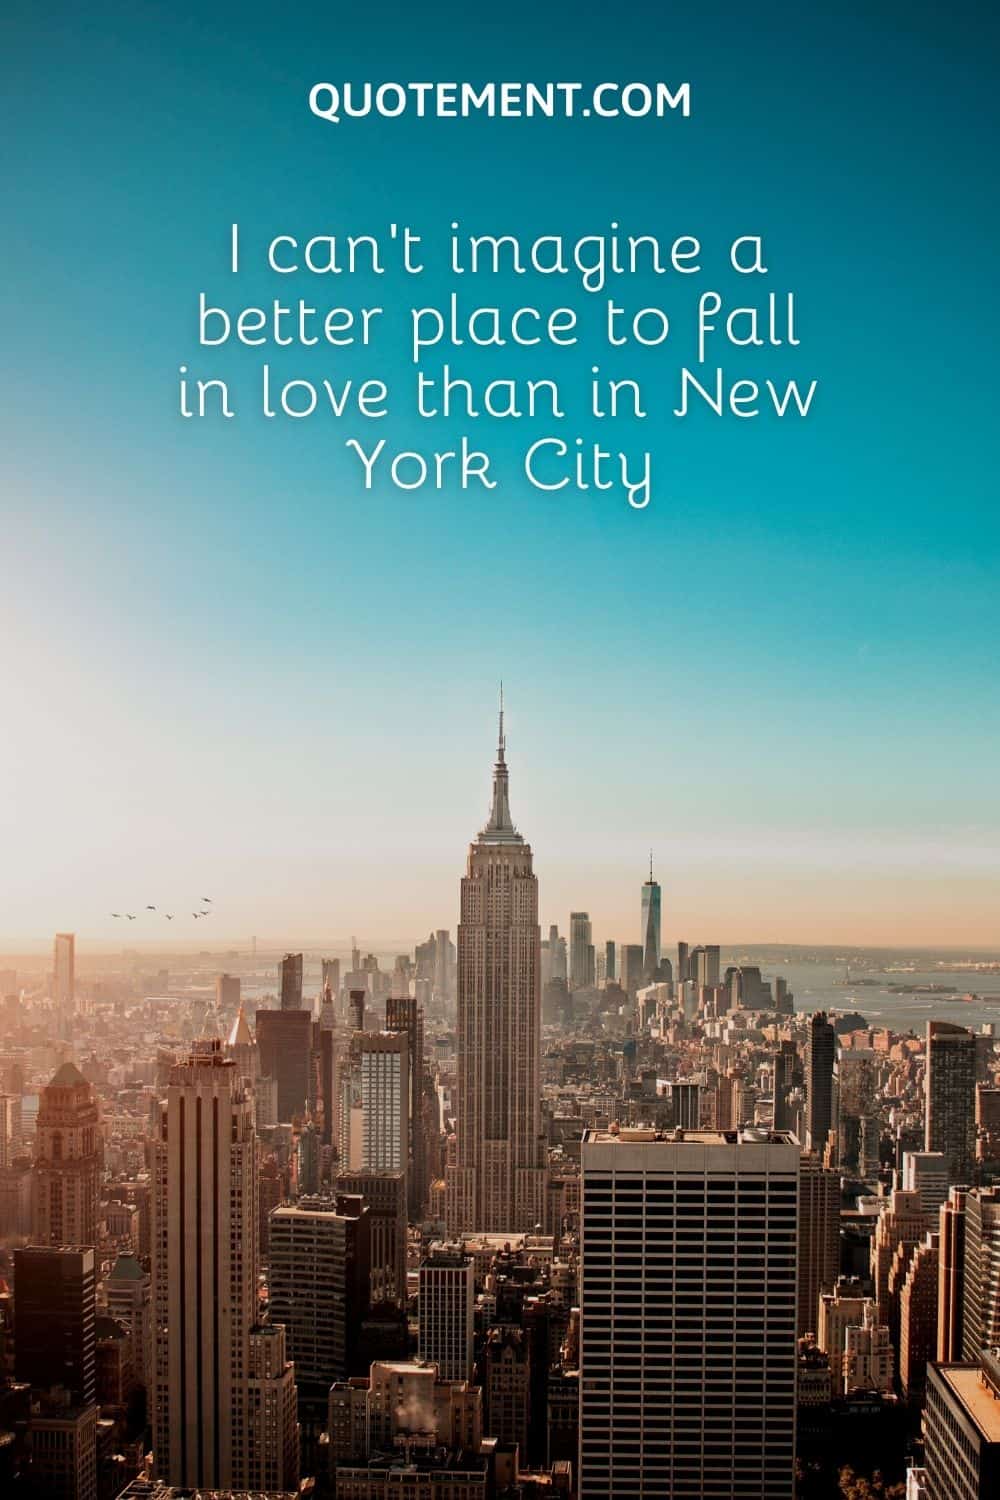 I can't imagine a better place to fall in love than in New York City.